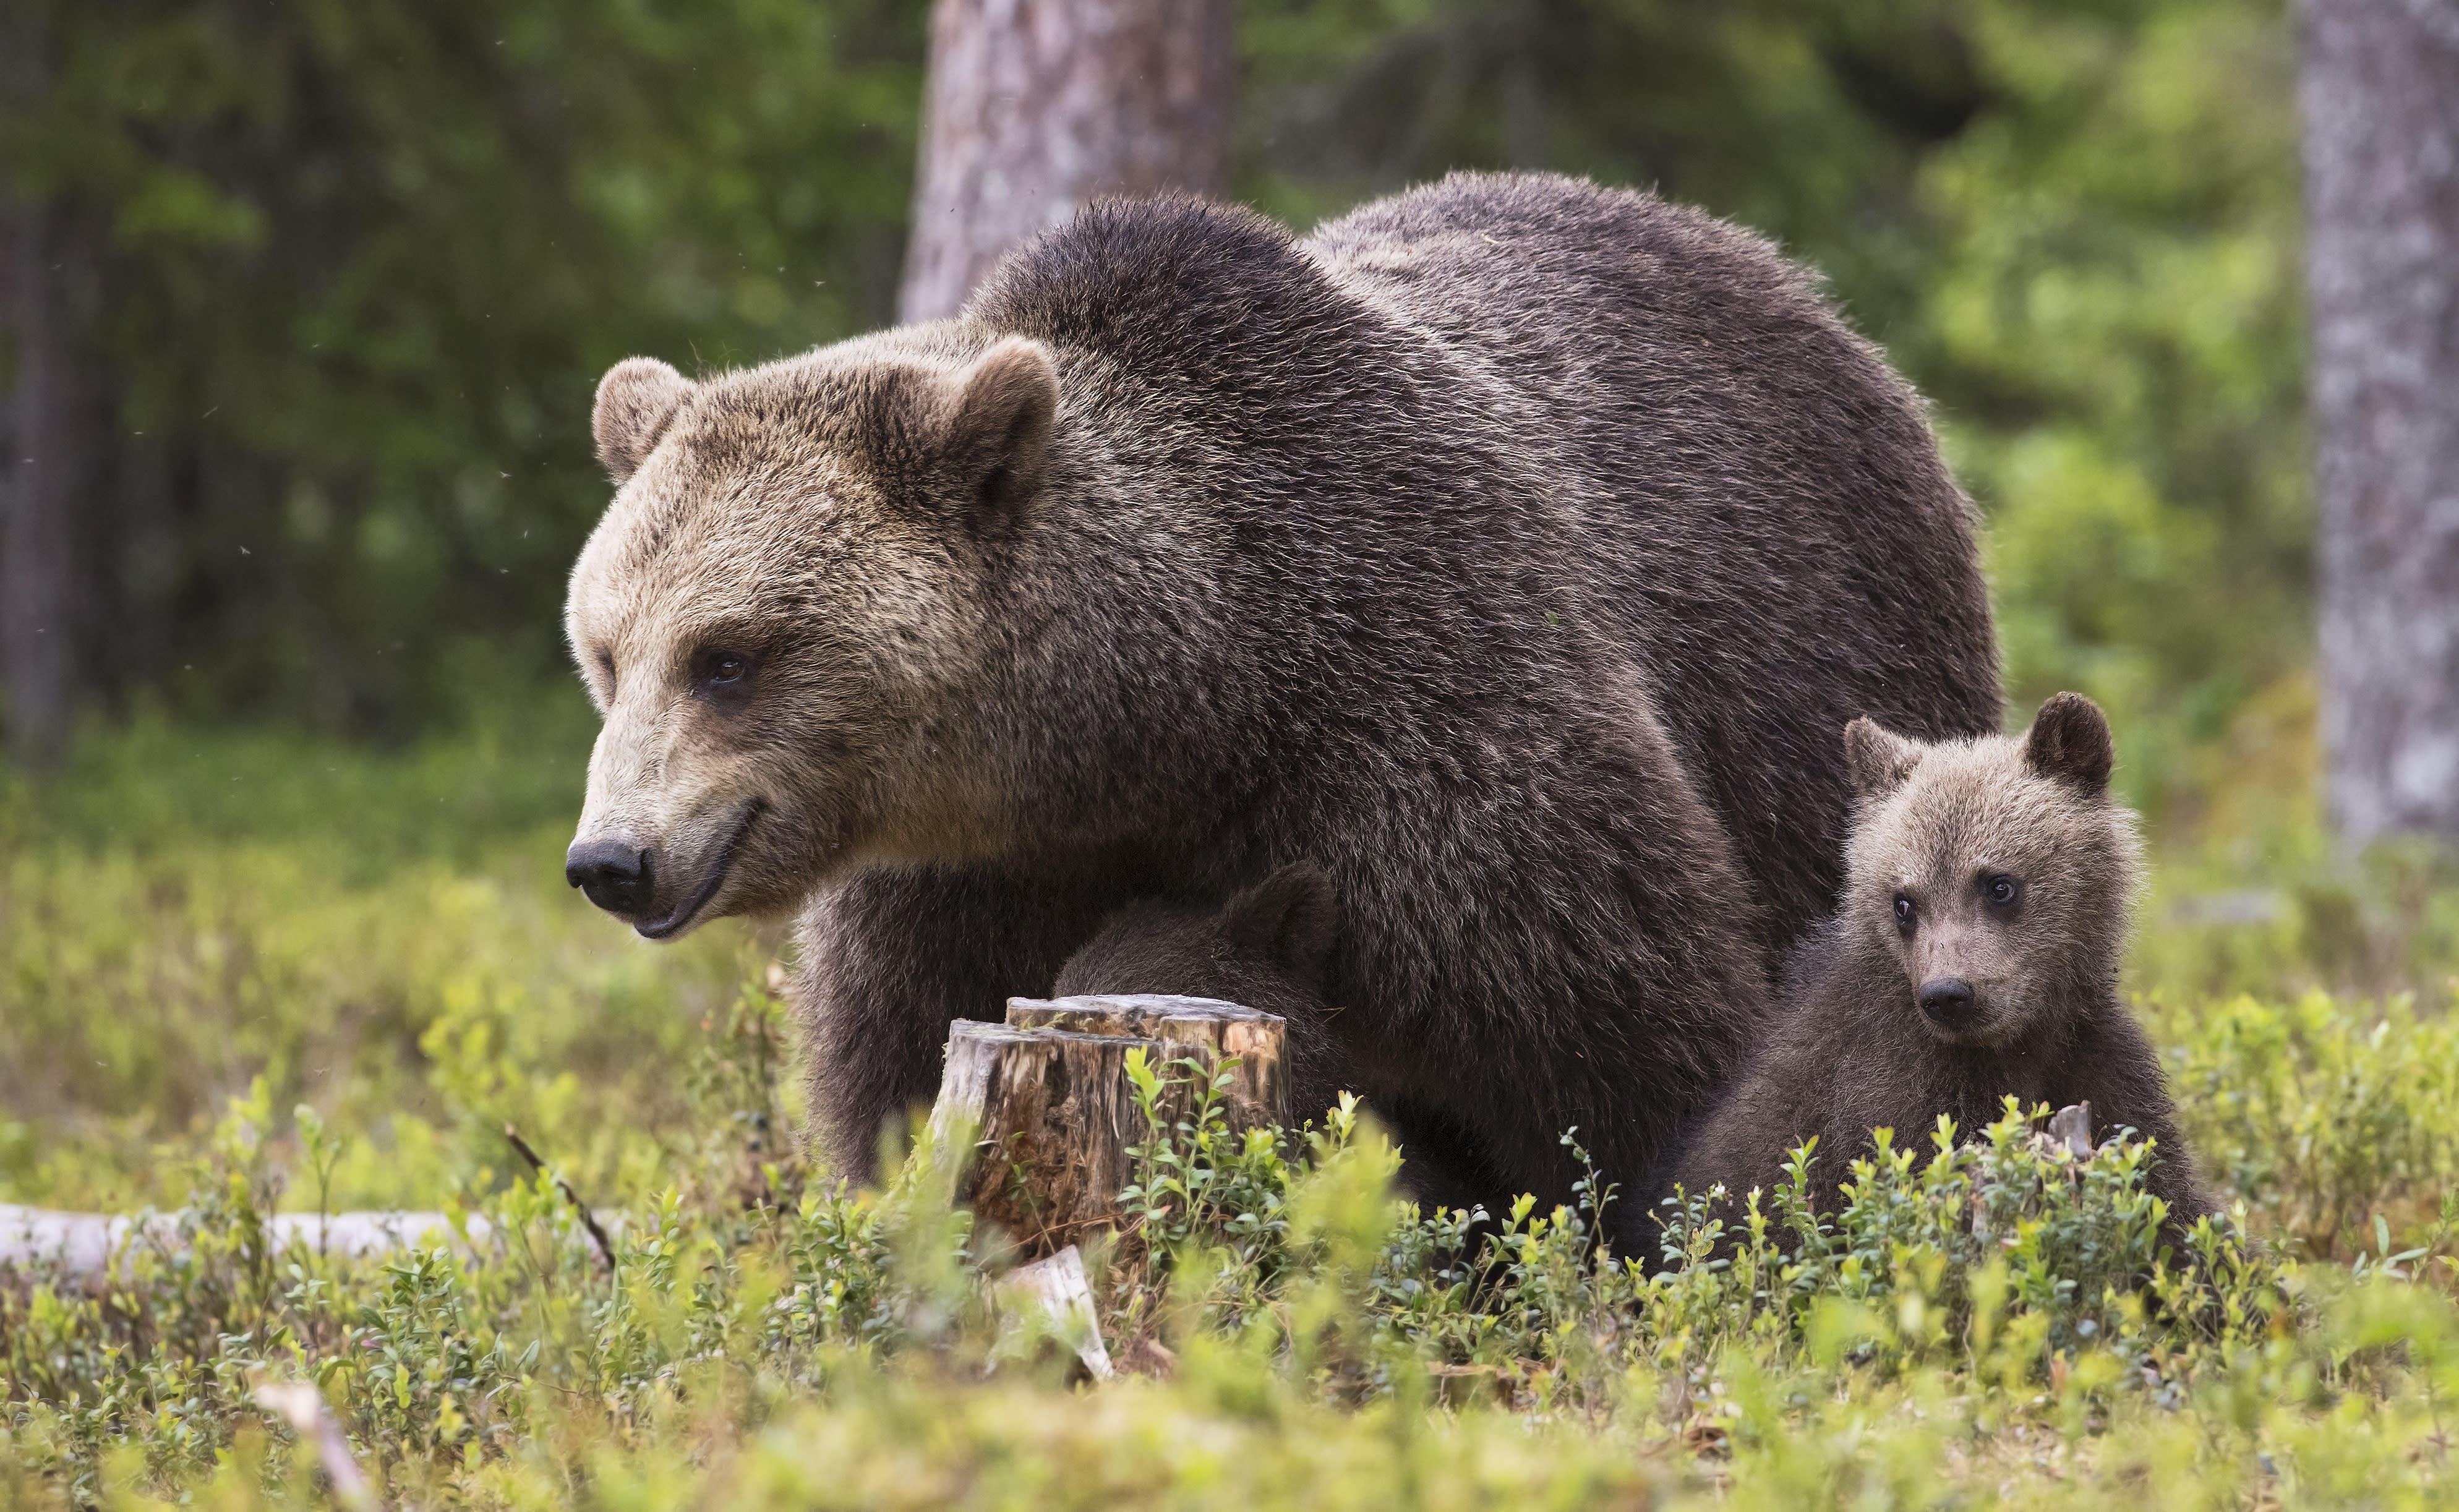 The authorities remove the mother bear from the village in Eastern Finland after the death of the cub